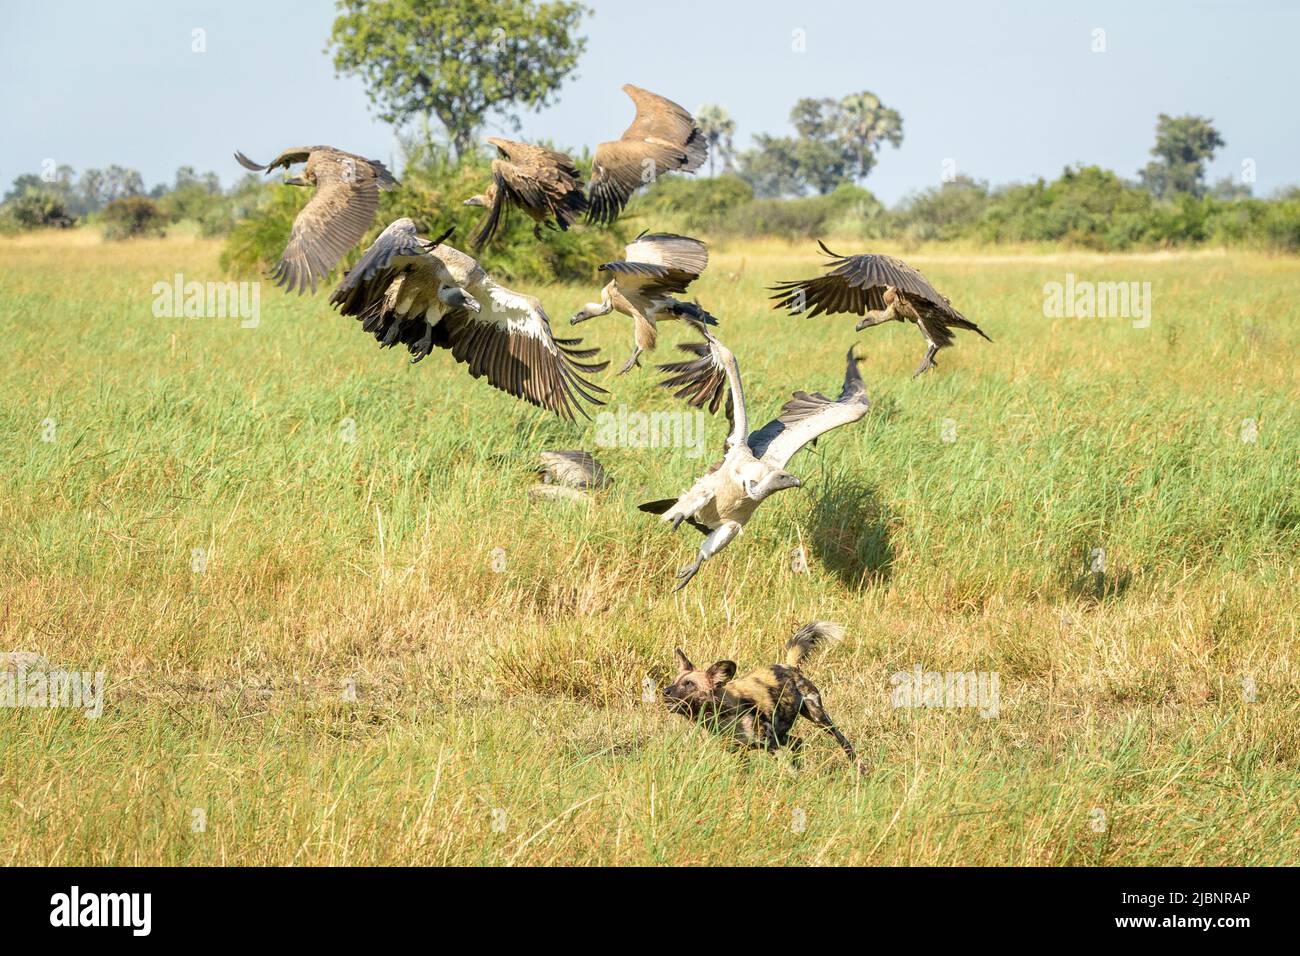 African Wild Dogs (Lycaon pictus) chasing White Backed Vultures (Gyps africanus) Stock Photo